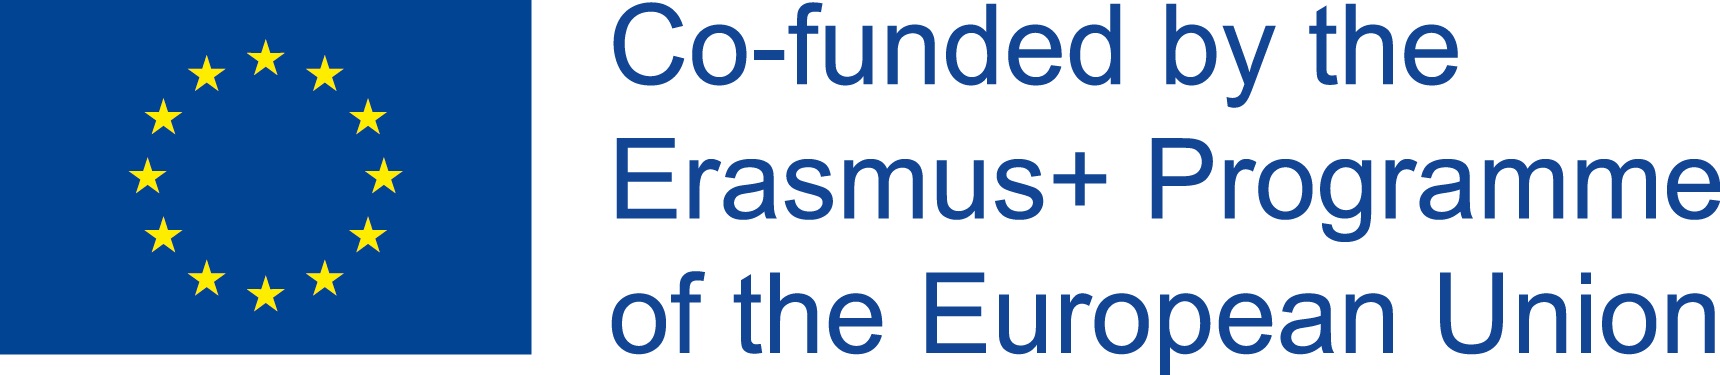 Co-financed by the ERASMUS+ Programme of the European Union